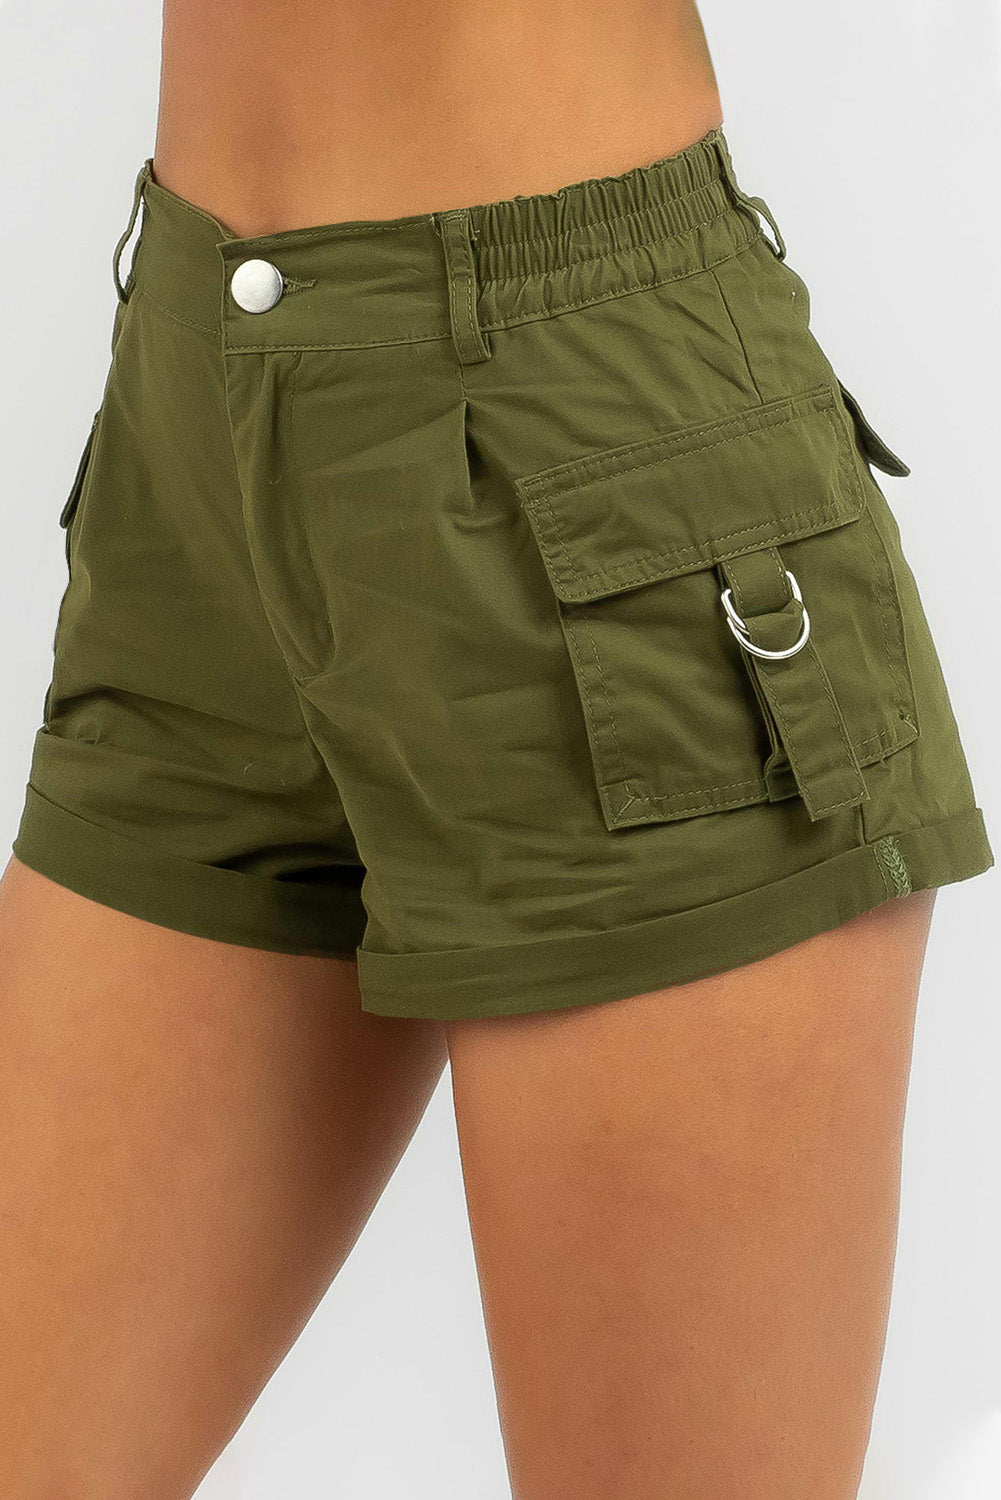 LC731262-9-S, LC731262-9-M, LC731262-9-L, LC731262-9-XL, Green short